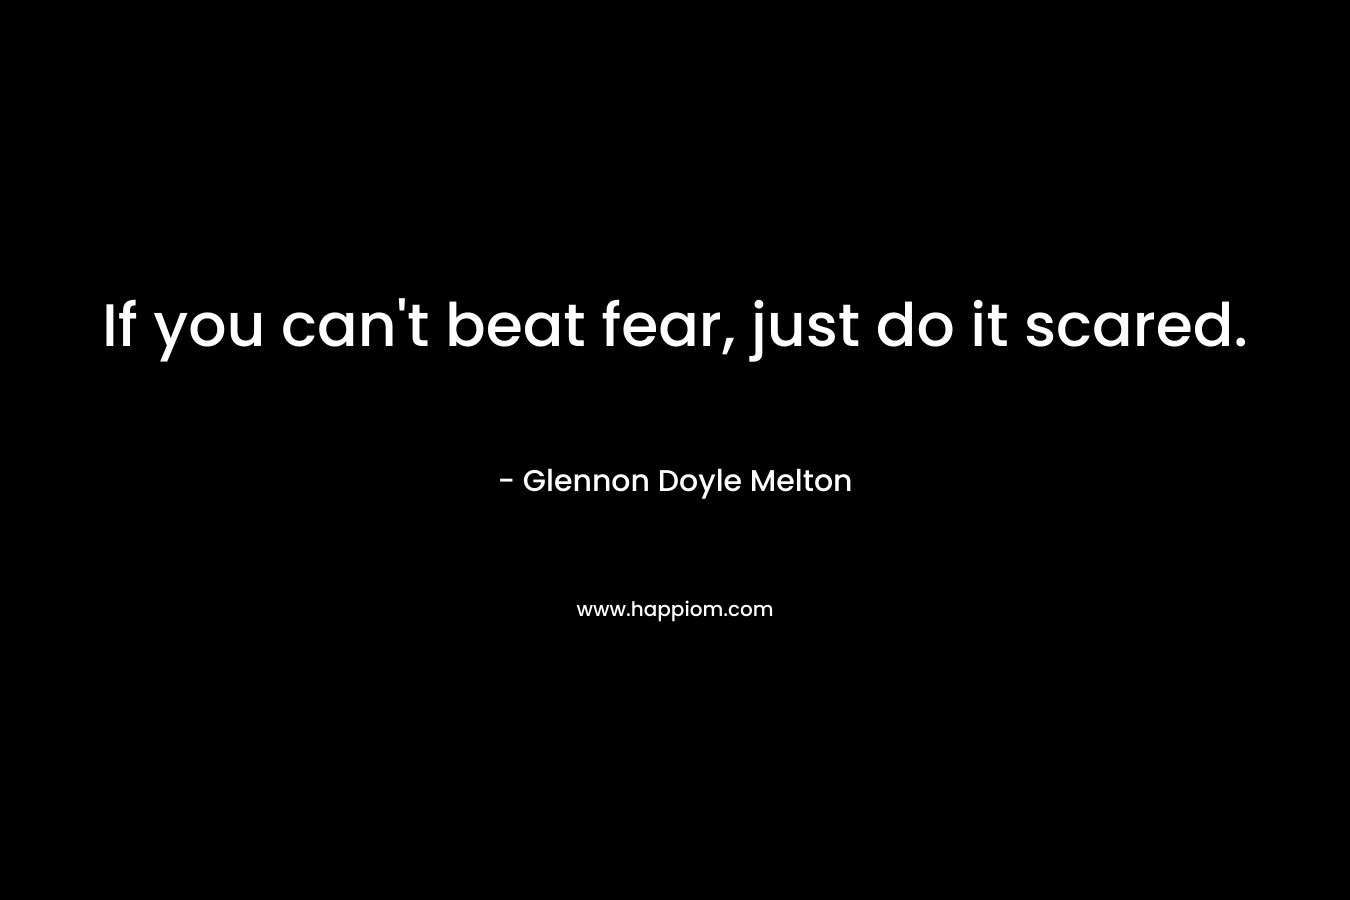 If you can’t beat fear, just do it scared. – Glennon Doyle Melton